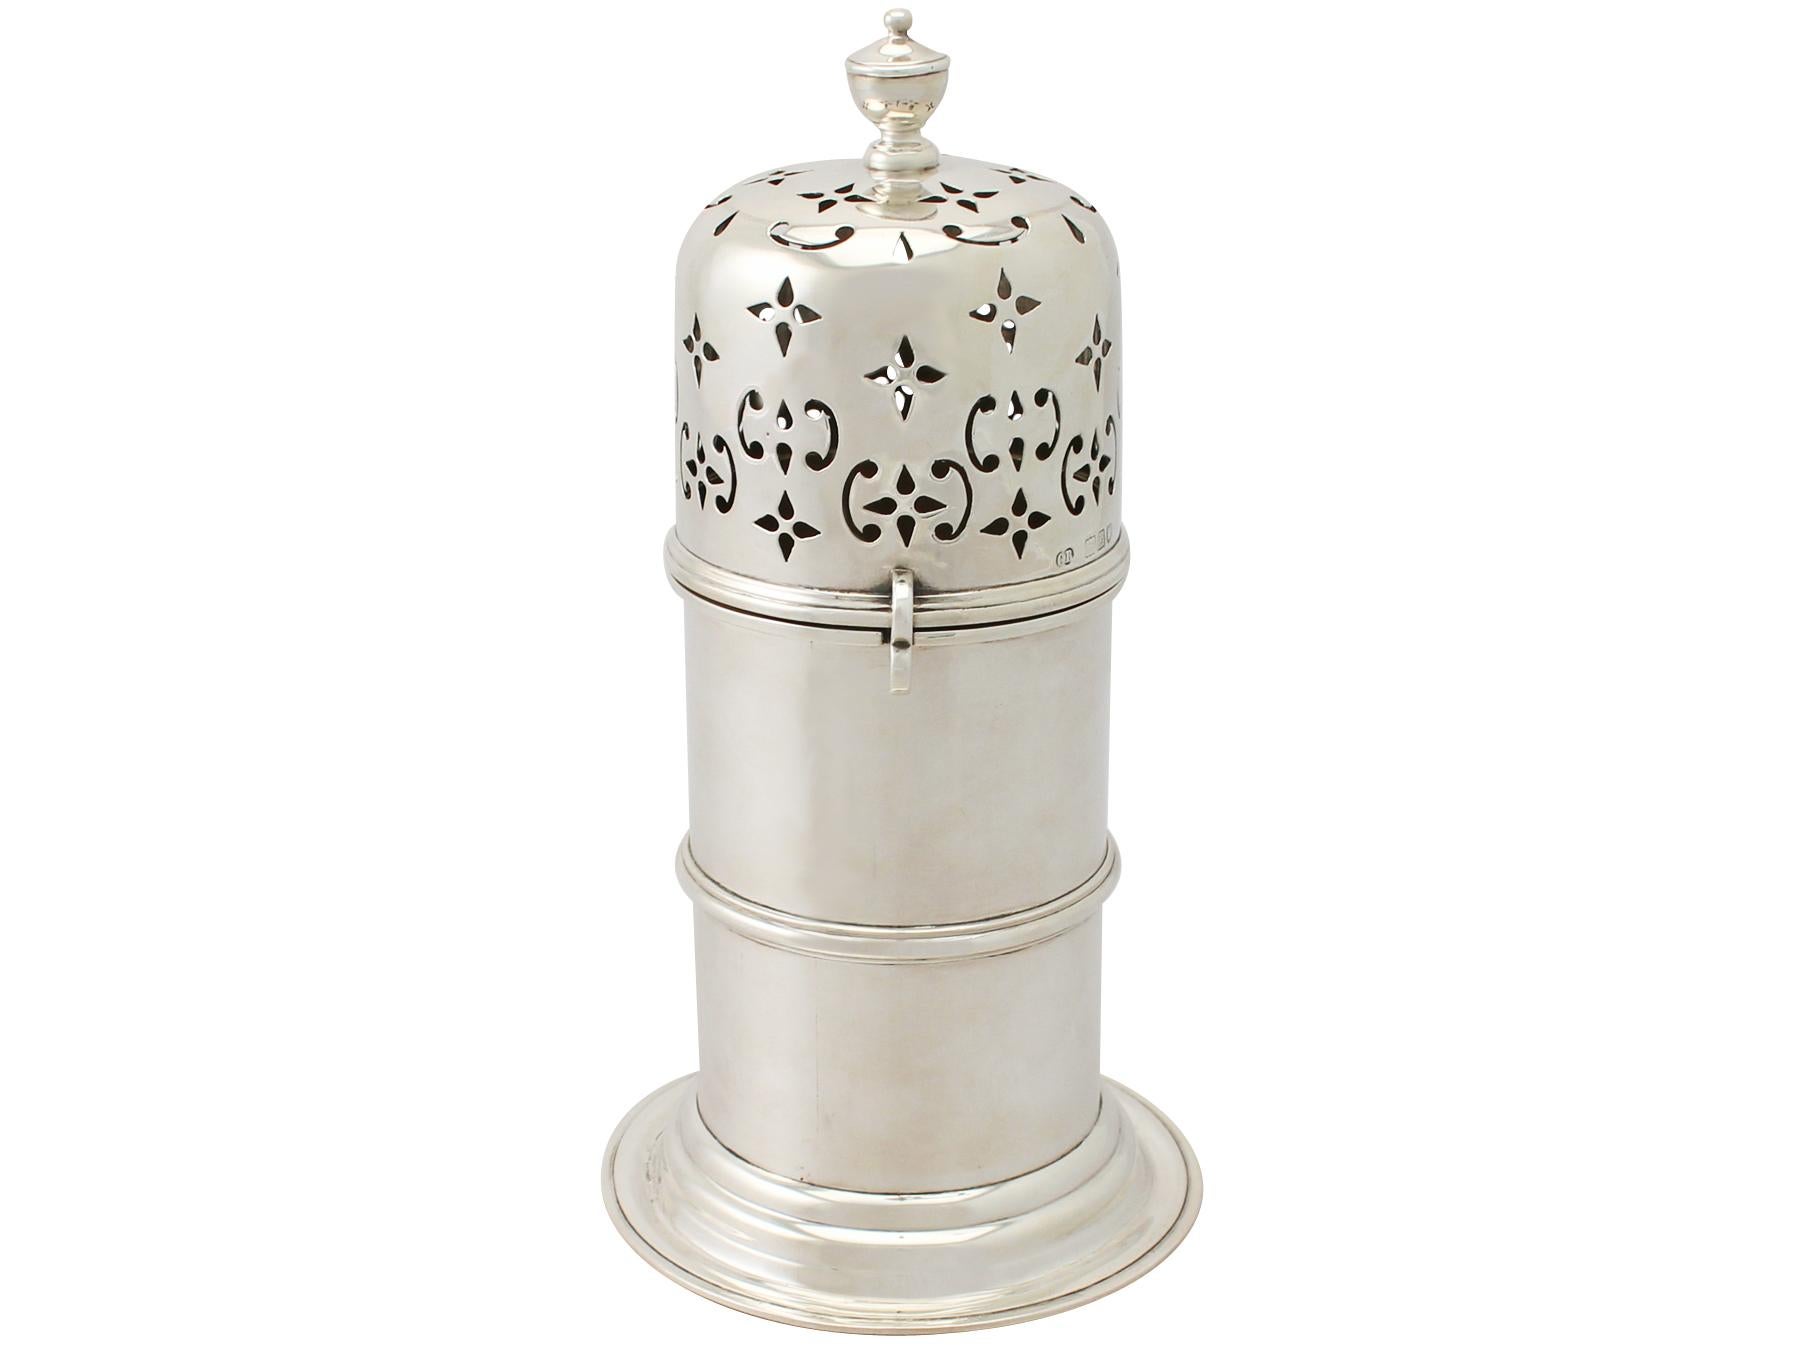 A very fine and impressive large antique Victorian English sterling silver lighthouse style caster; part of our silverware collection.

This impressive antique Victorian English sterling silver caster has a tapering cylindrical form onto a swept,